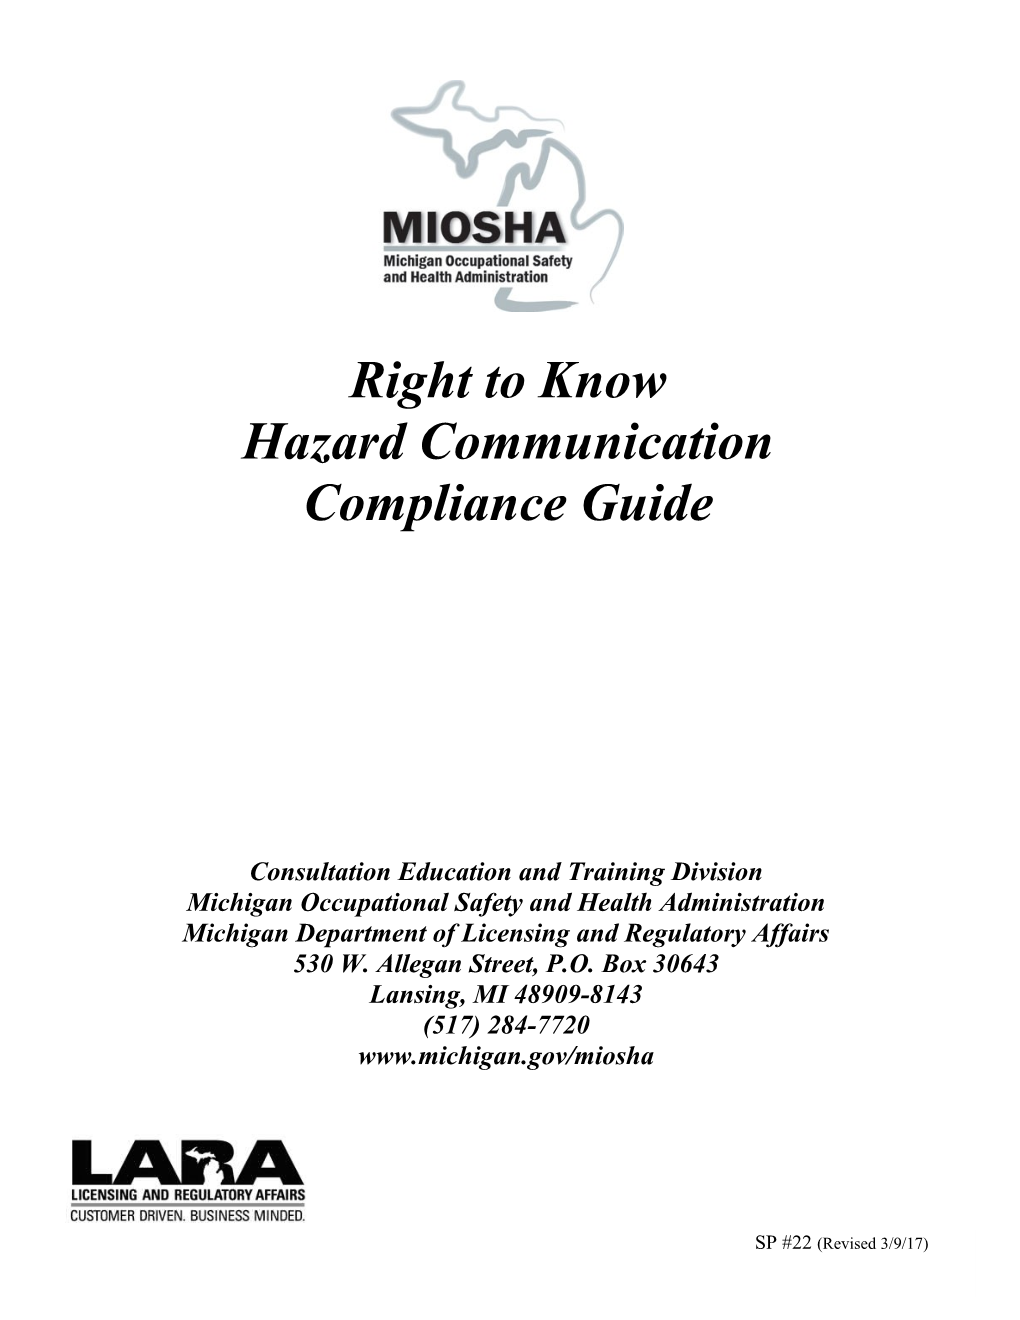 Right to Know Hazard Communication Compliance Guide